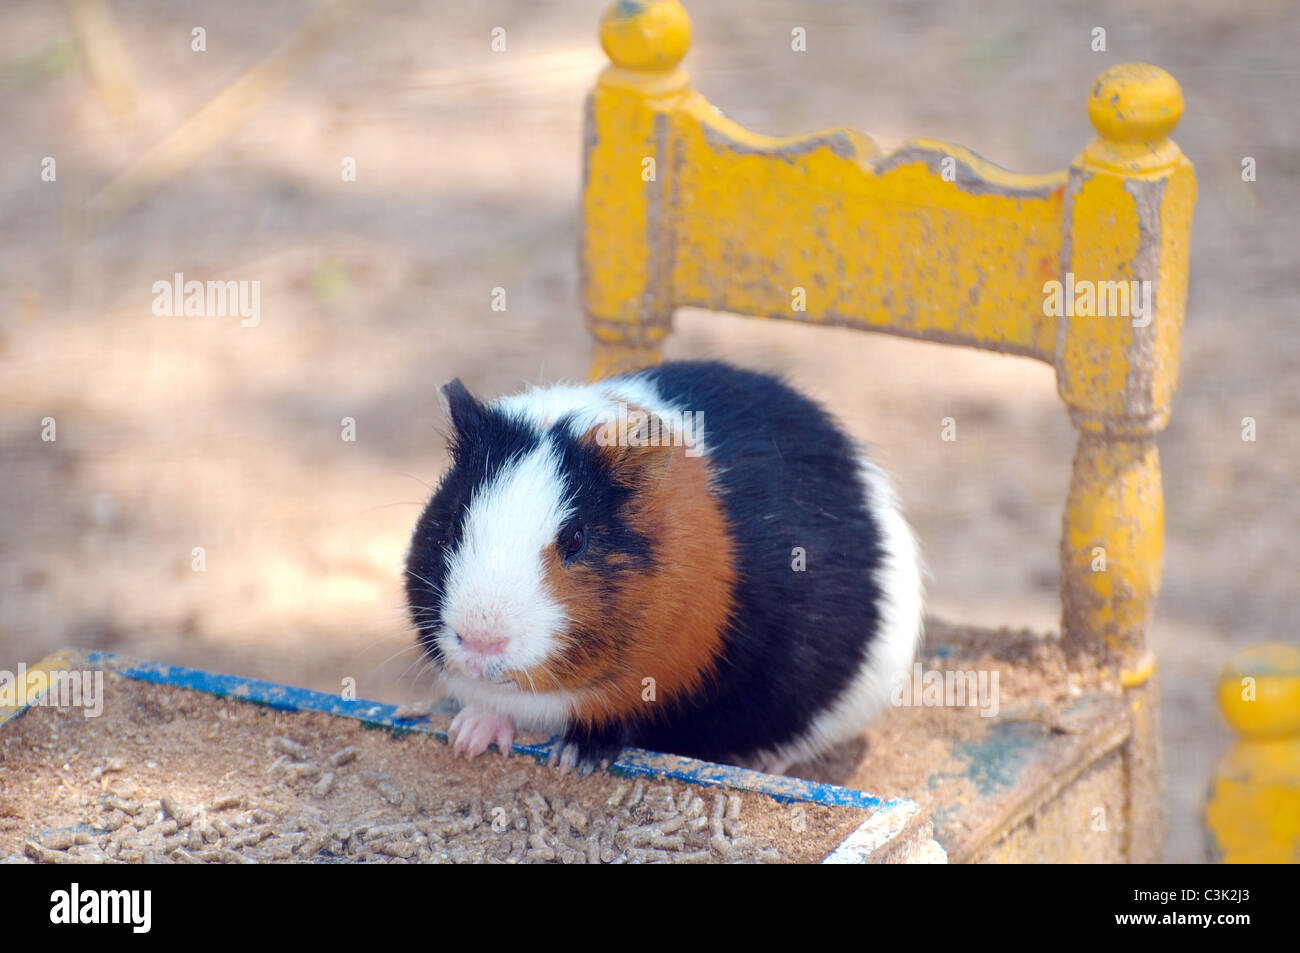 Guinea pigs (Cavia porcellus) sitting on miniature chairs at a miniature table, Tunis, Africa Stock Photo